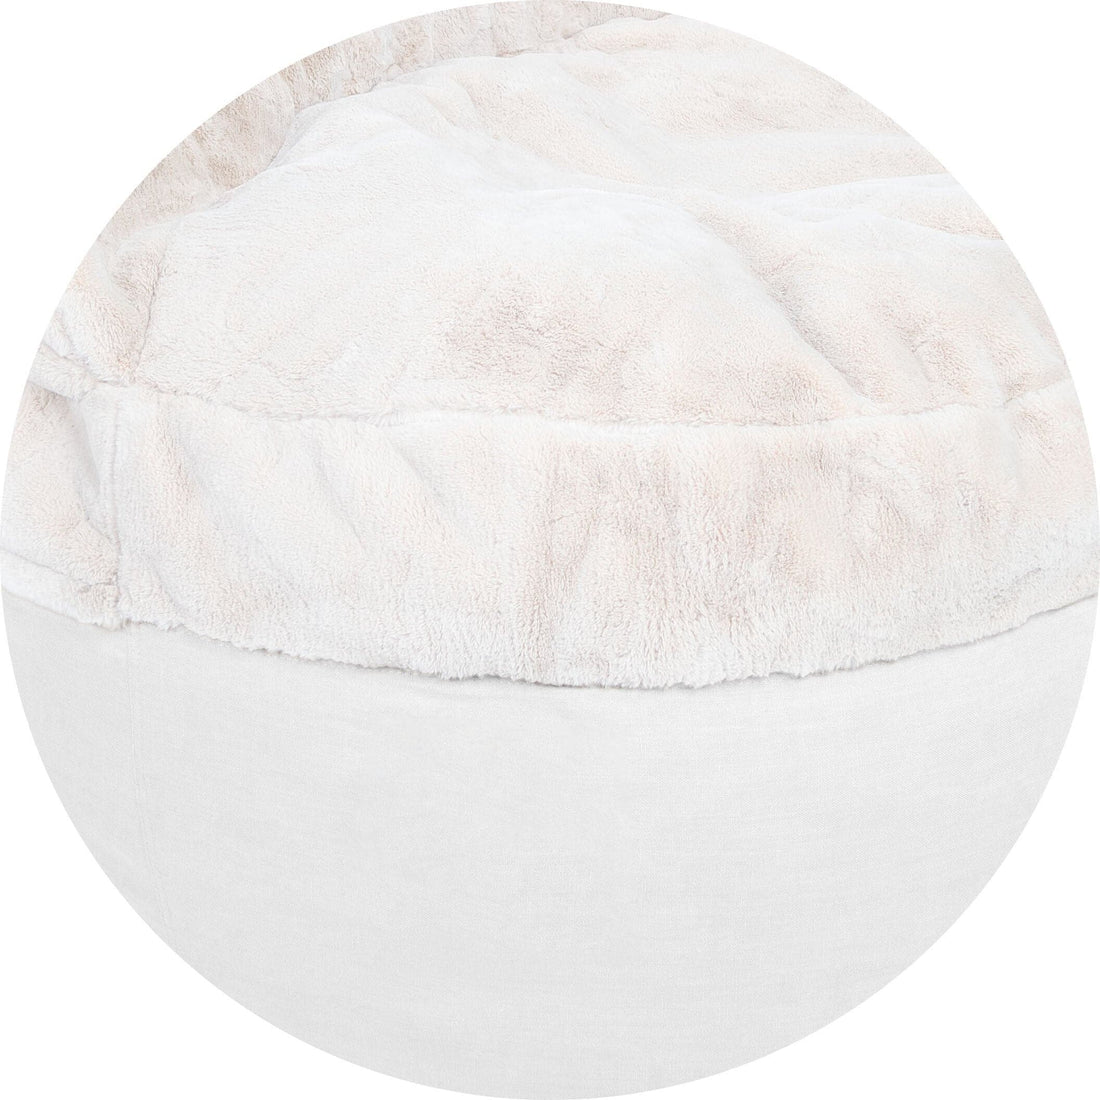 Pouf/Footstool Cover - NEST Bunny Fur